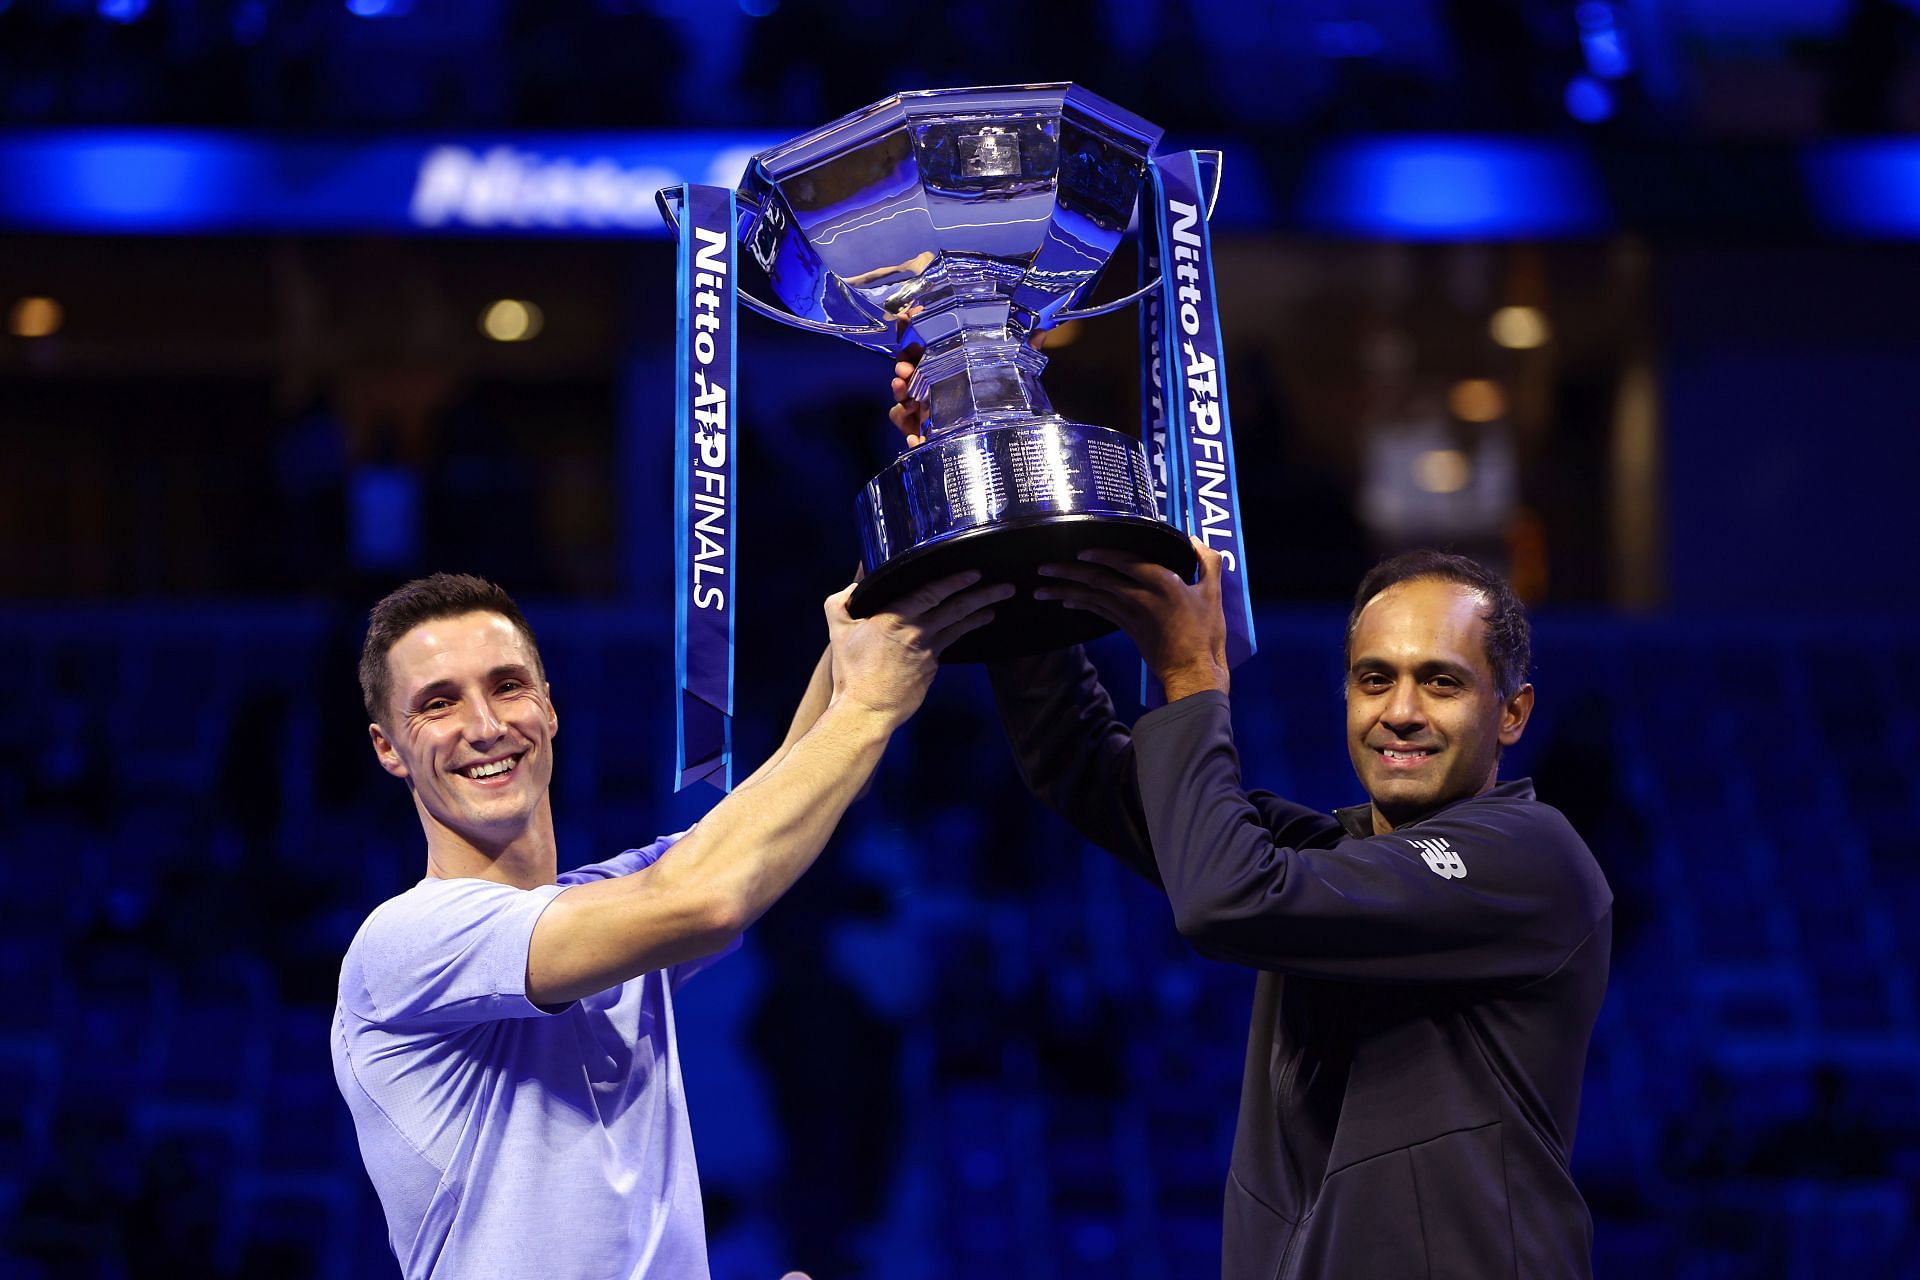 Rajeev Ram and Joe Salisbury with the Nitto ATP Finals doubles trophy.